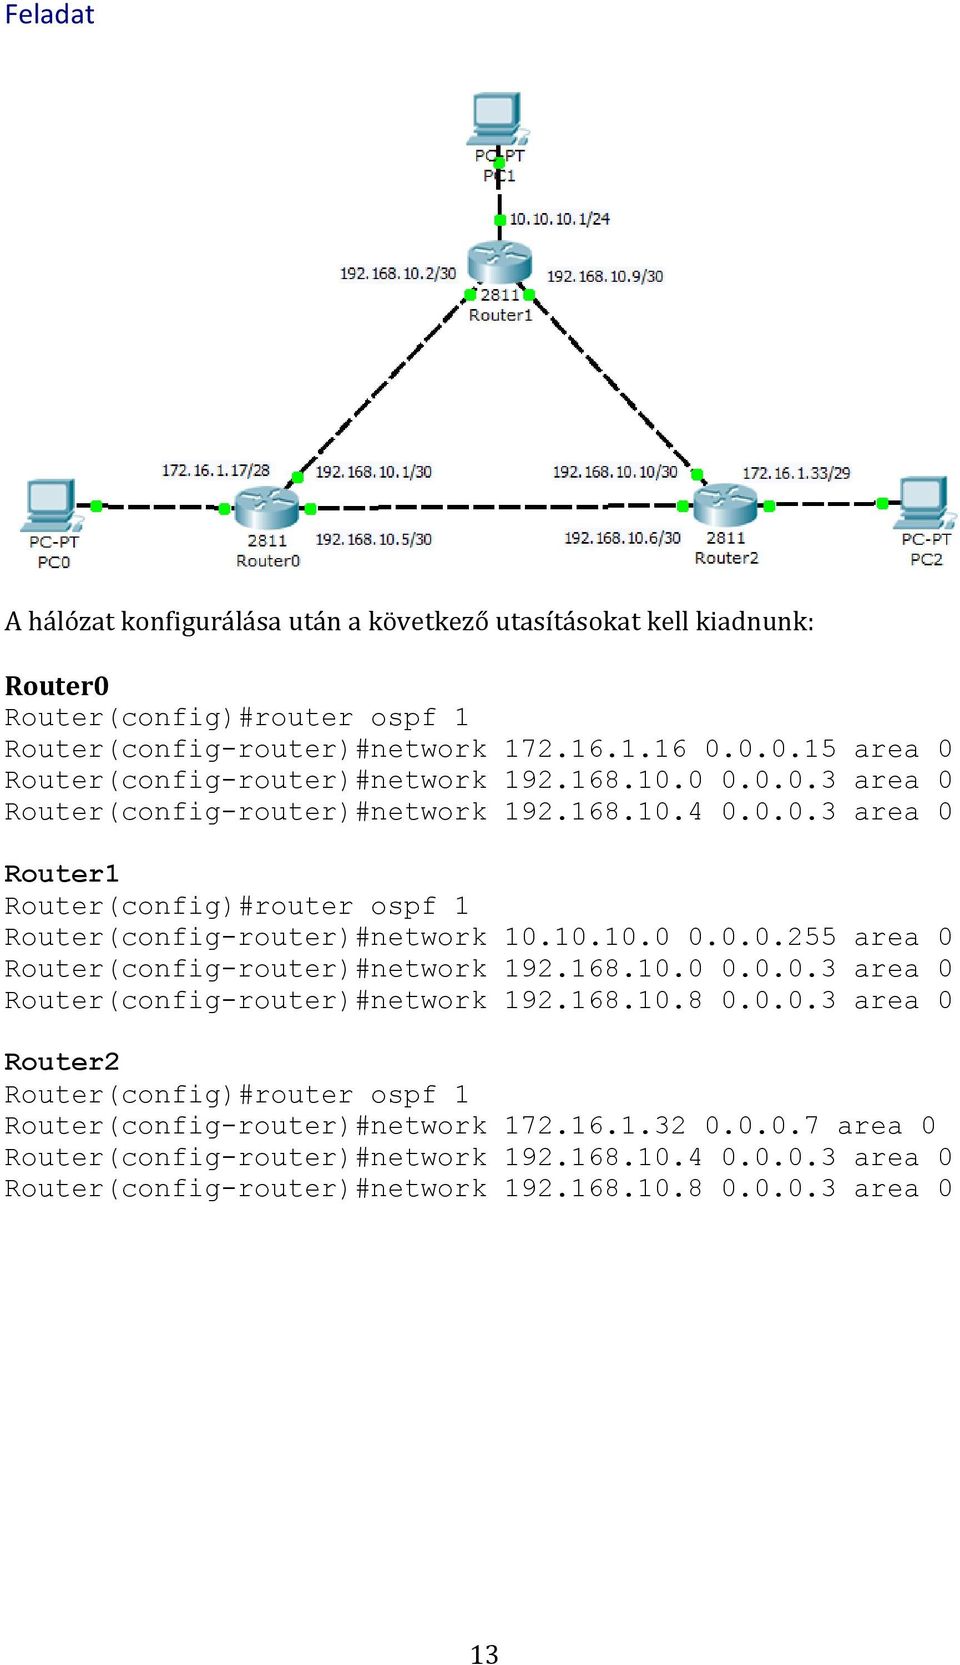 168.10.0 0.0.0.3 area 0 Router(config-router)#network 192.168.10.8 0.0.0.3 area 0 Router2 Router(config)#router ospf 1 Router(config-router)#network 172.16.1.32 0.0.0.7 area 0 Router(config-router)#network 192.